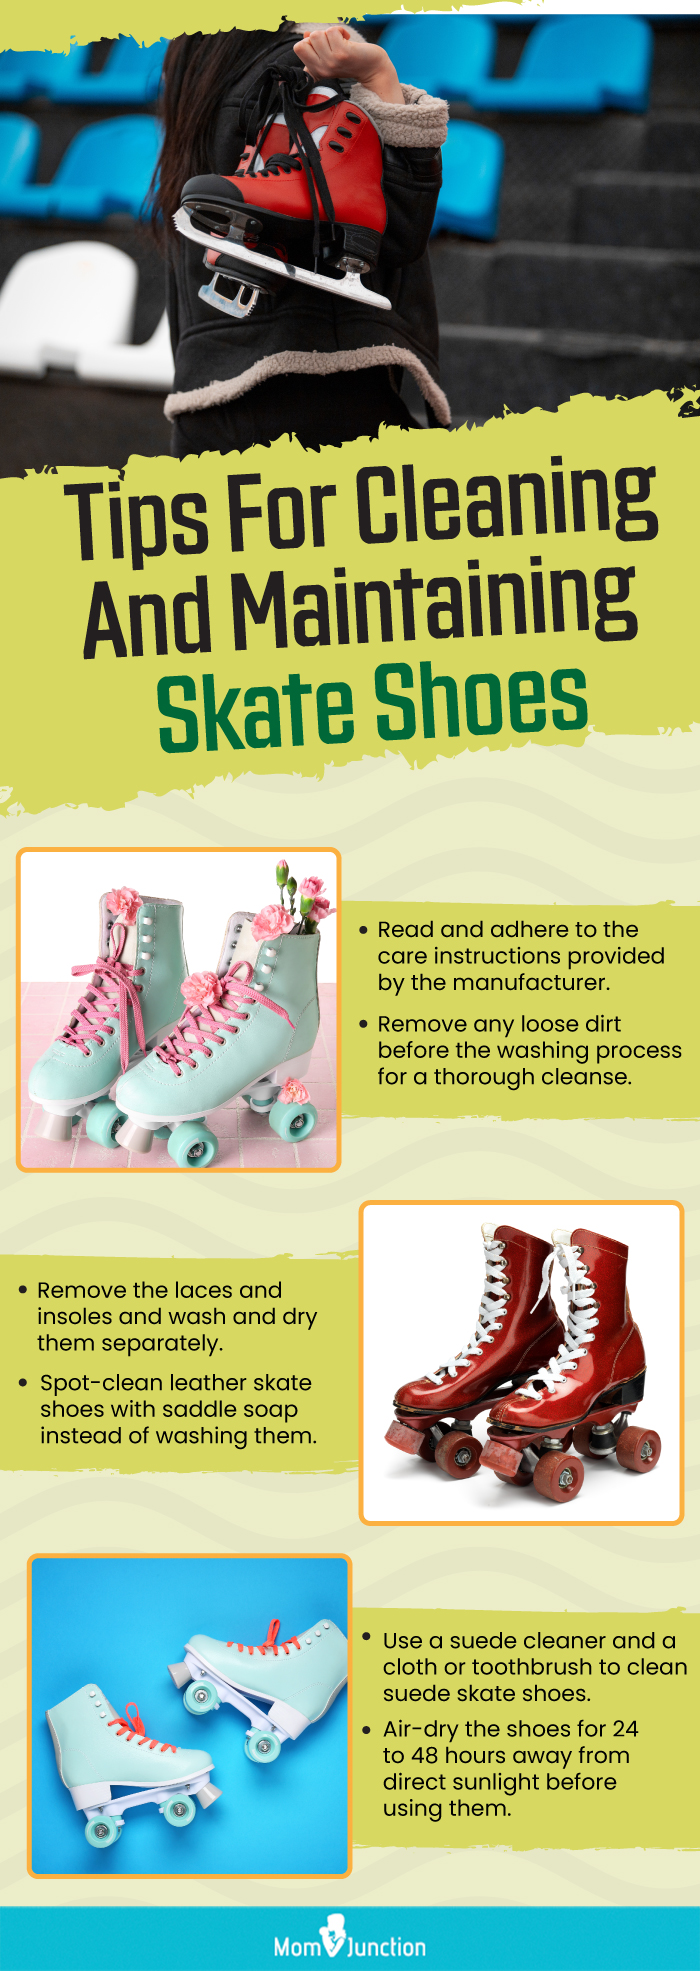 Tips For Cleaning And Maintaining Skate Shoes (infographic)